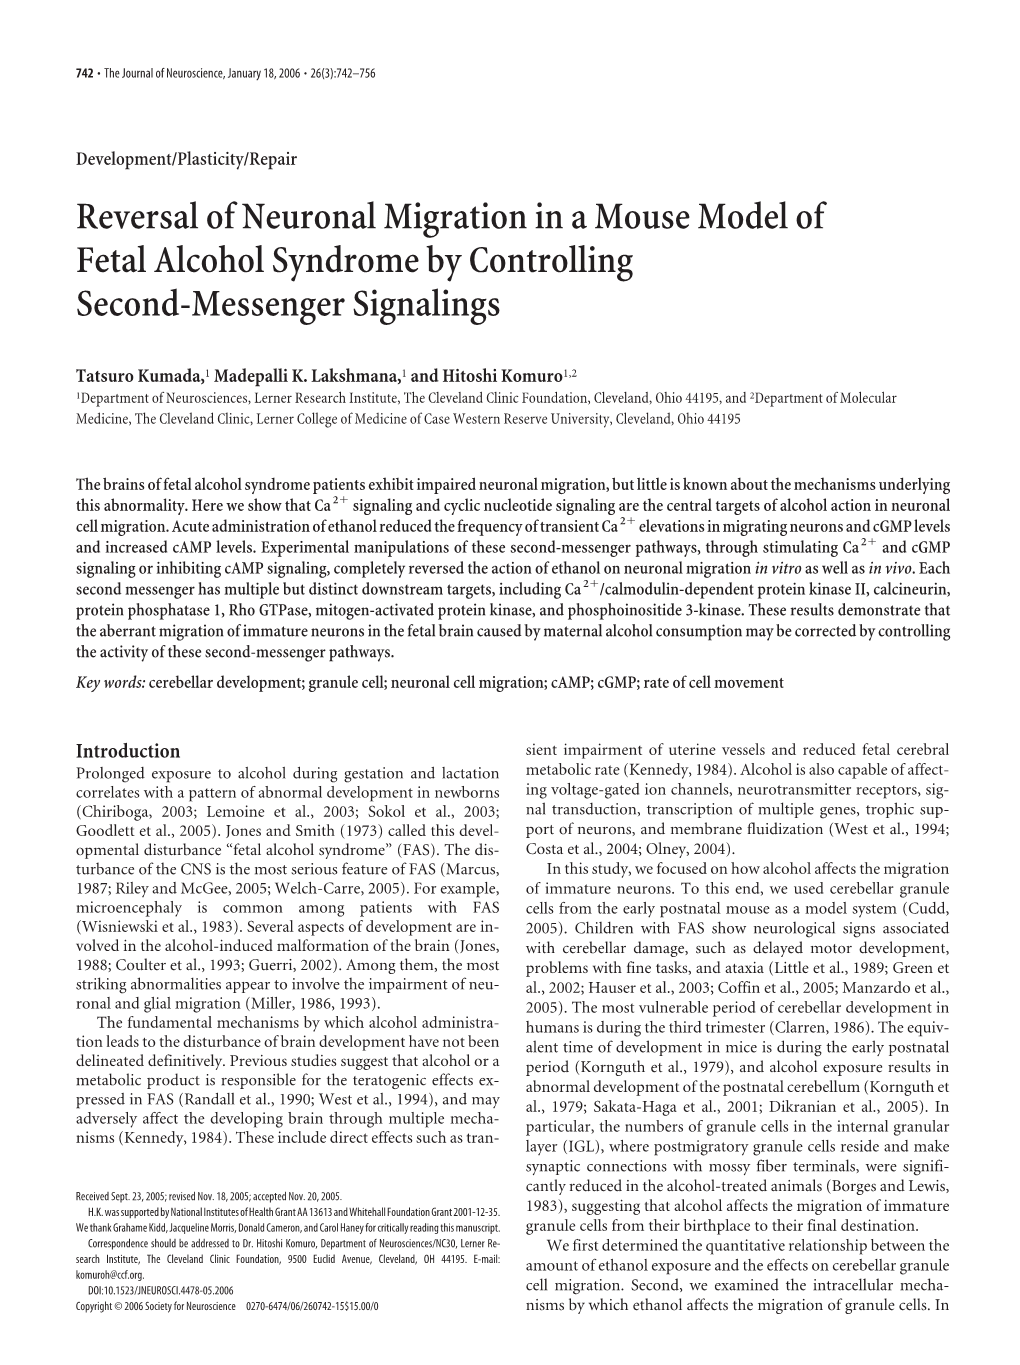 Reversal of Neuronal Migration in a Mouse Model of Fetal Alcohol Syndrome by Controlling Second-Messenger Signalings